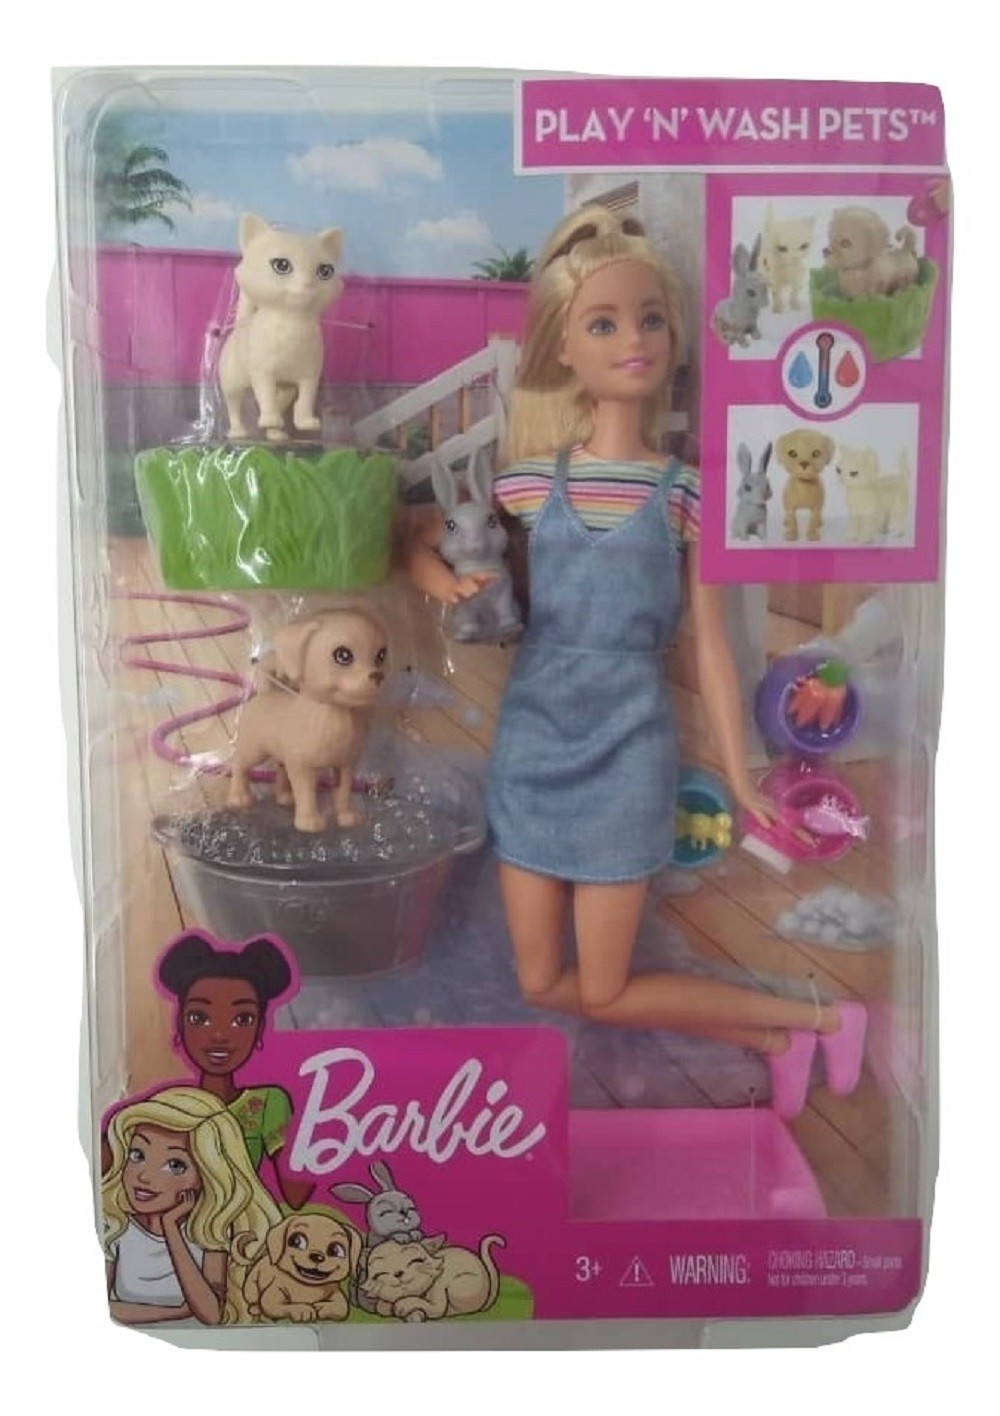 Barbie FXH11 Play ‘n' Wash Pets Doll and Playset for sale online 